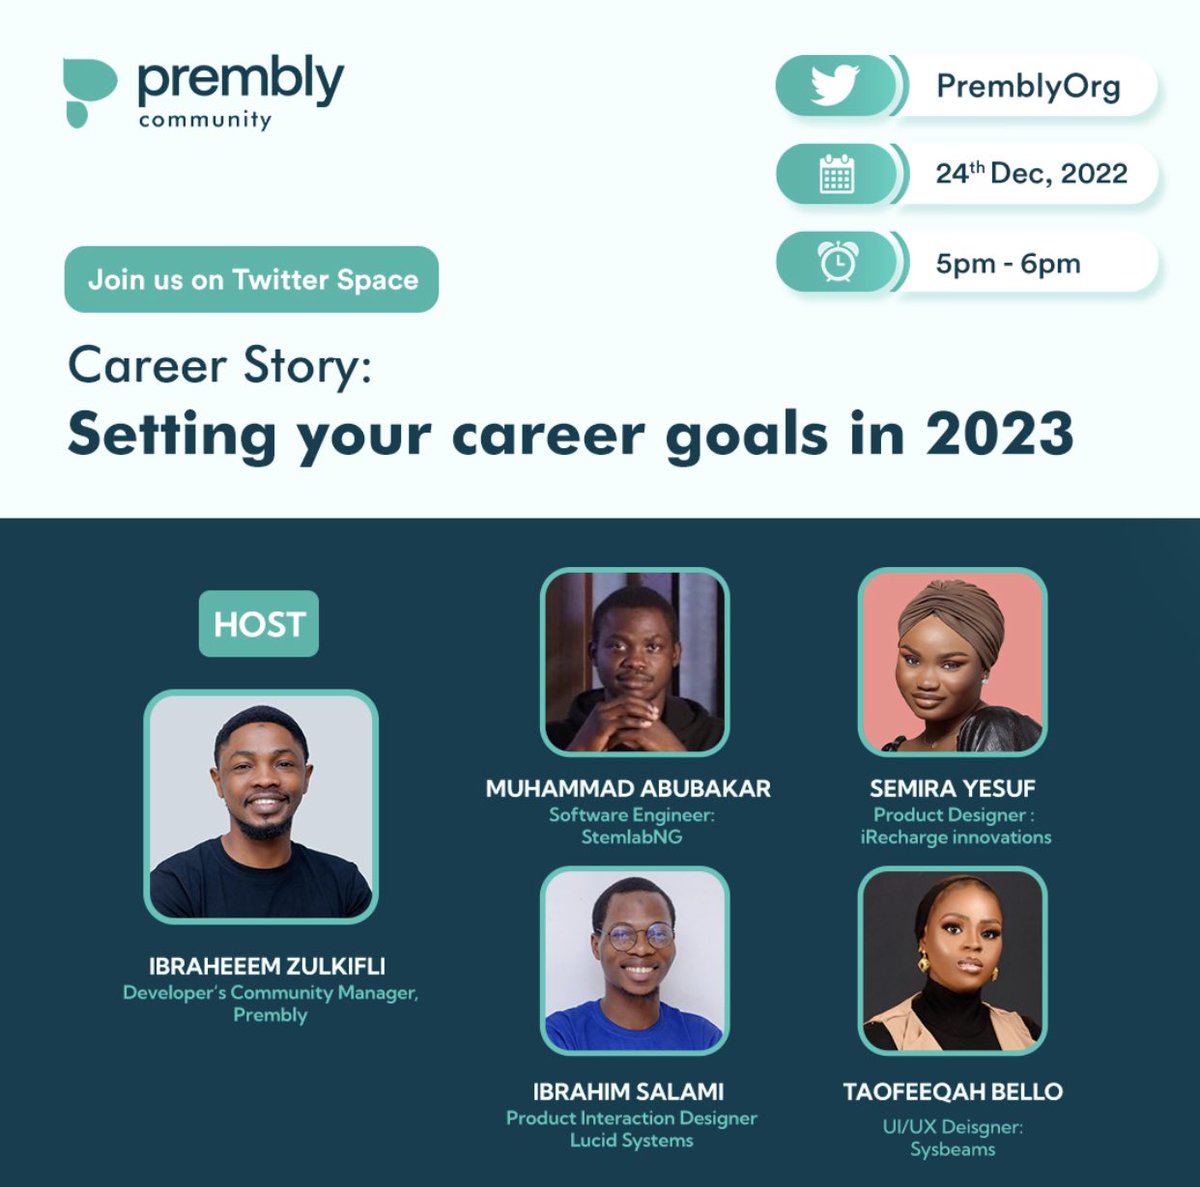 Setting career goals is key to staying motivated and focused on professional development. 

Join the conversation with our community members on how to set career growth the right way in the coming year.

Se A Reminder:

twitter.com/i/spaces/1yNGa…

#CareerStories #Career